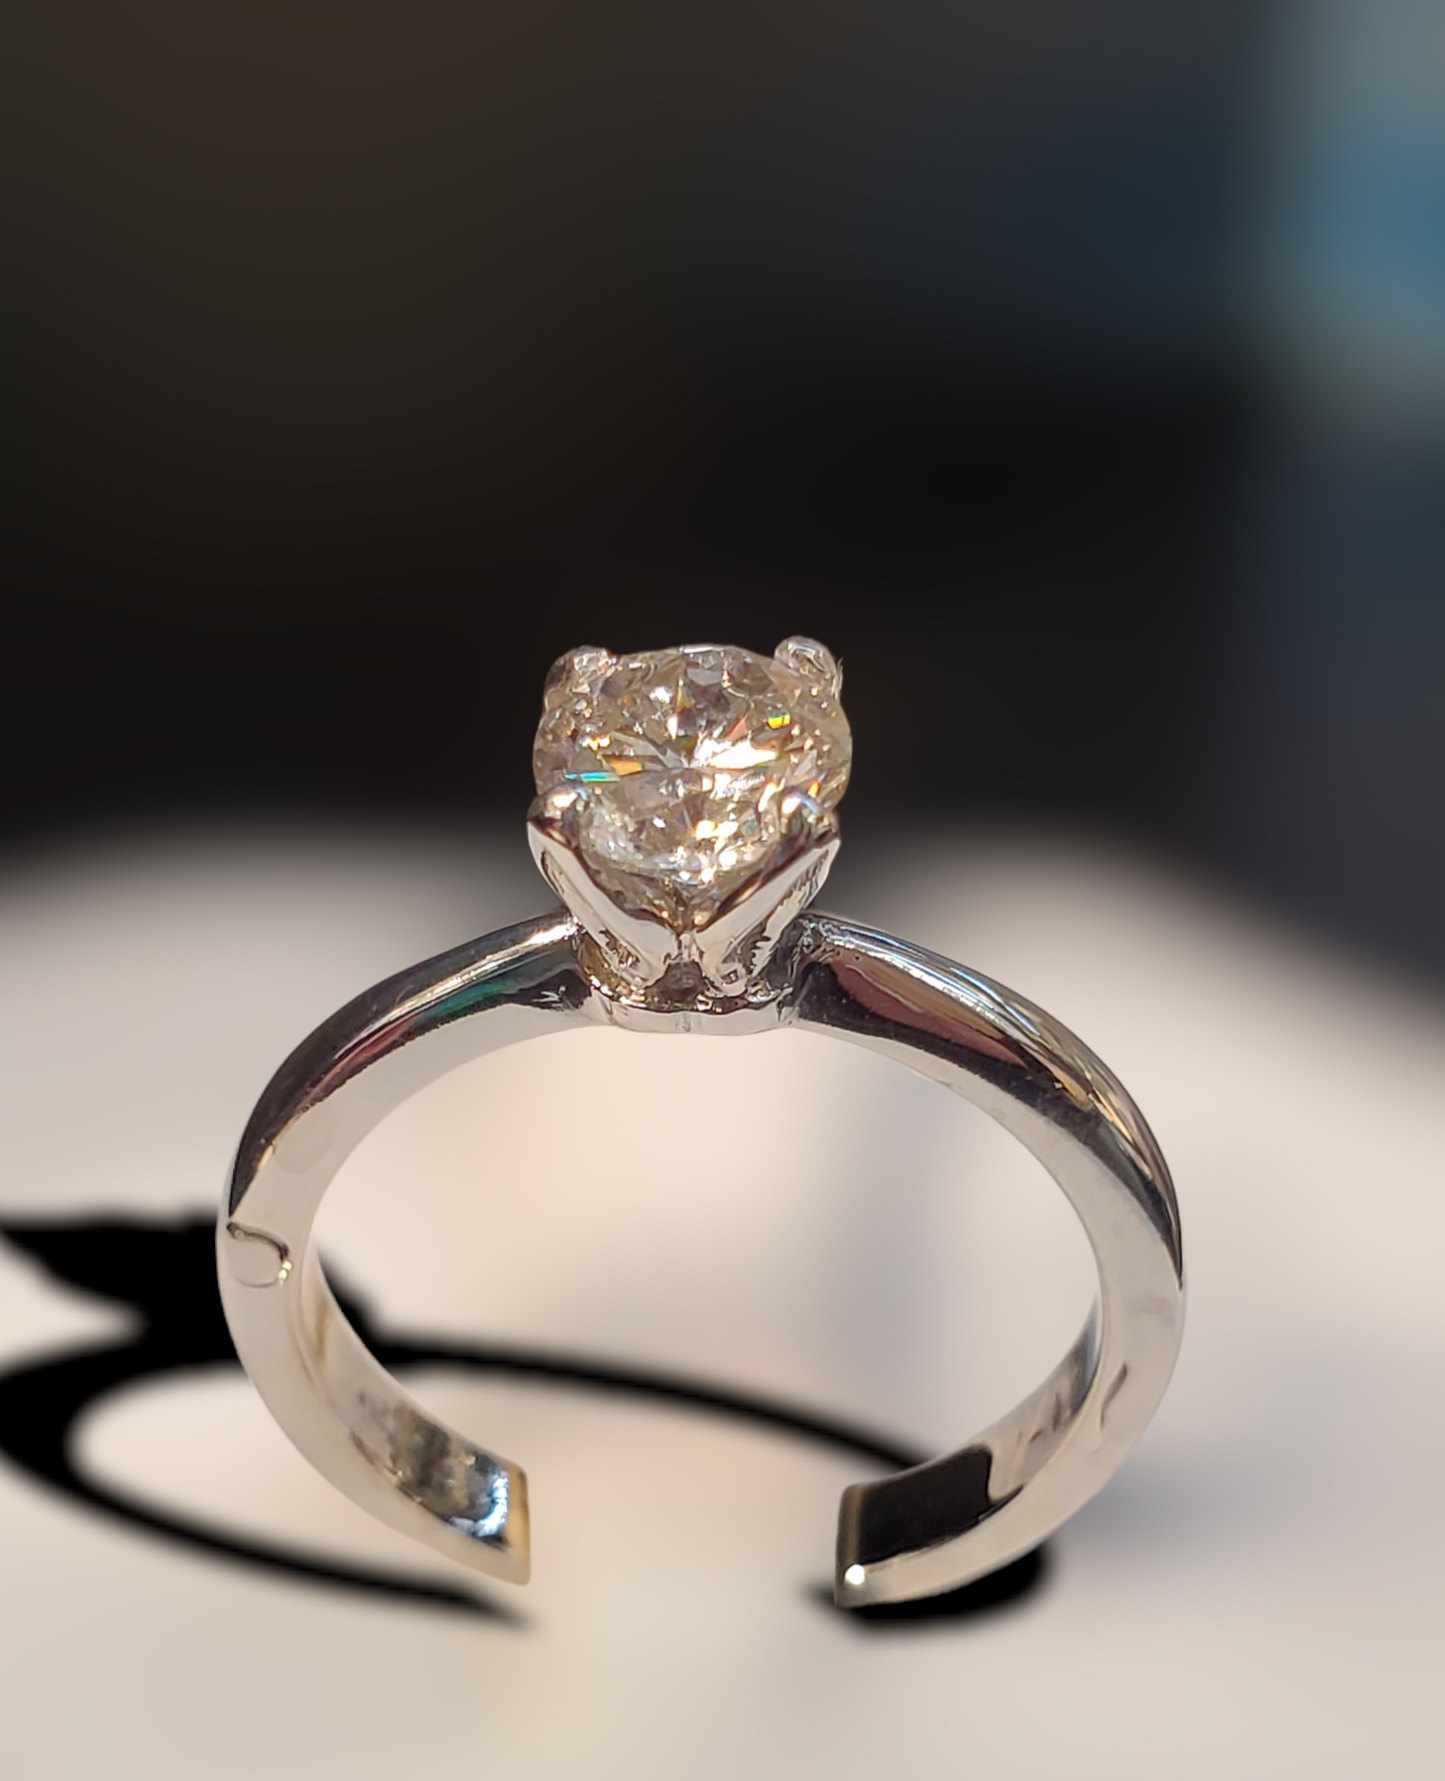 4856 solitaire engagement ring